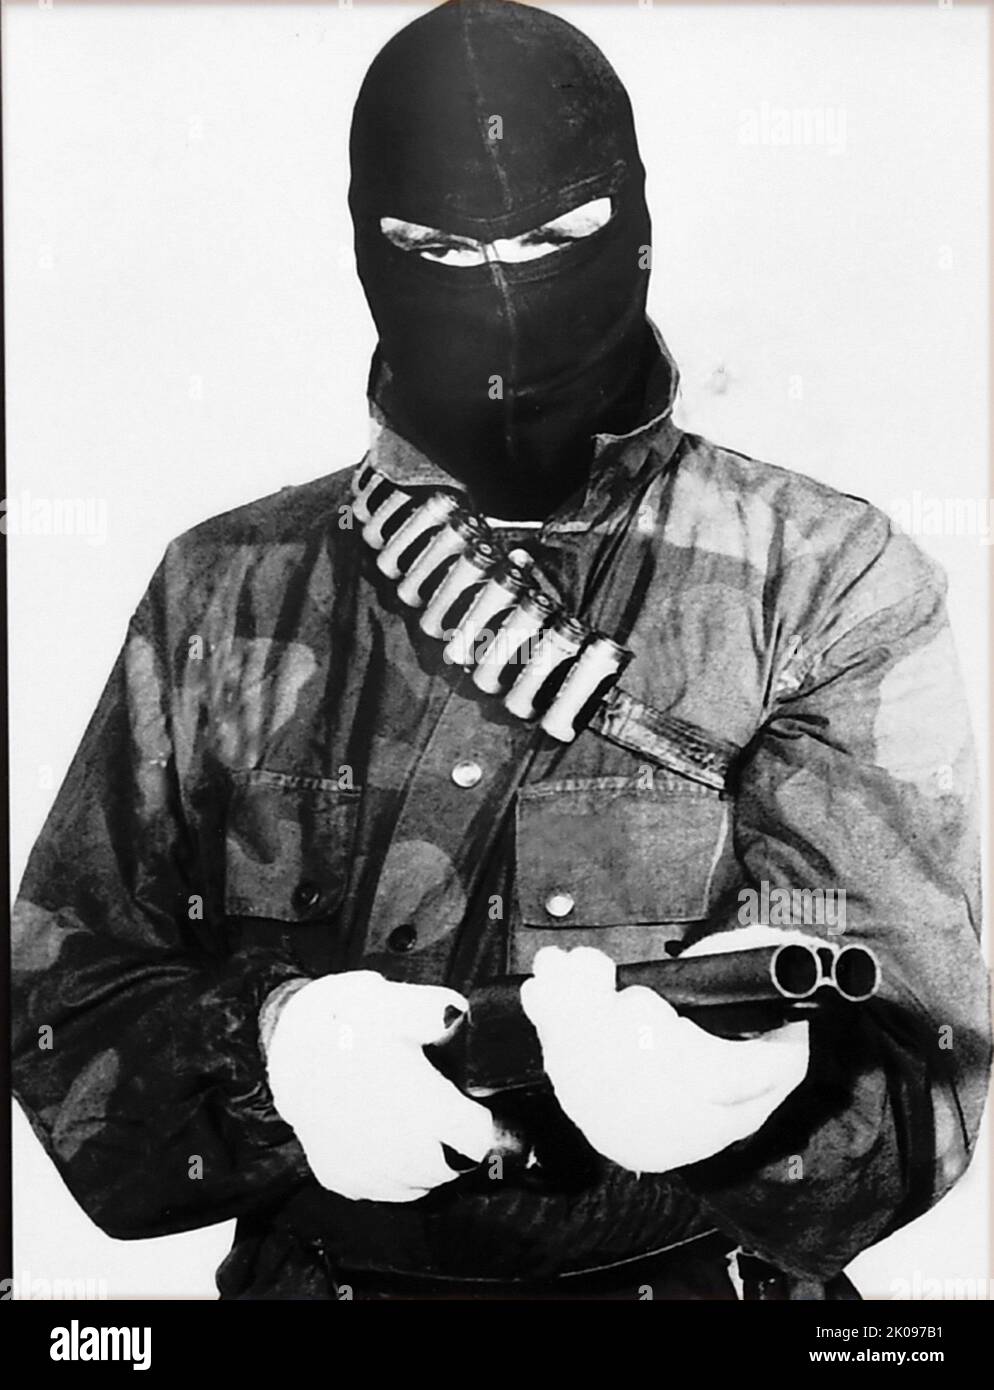 Donald Neilson (born Donald Nappey; 1 August 1936 - 18 December 2011), alias the 'Black Panther', was a British armed robber, kidnapper and multiple murderer. He murdered three men during robberies of sub-post offices between 1971 and 1974, and murdered kidnap victim Lesley Whittle, an heiress from Highley, Shropshire, in January 1975. He was apprehended later that year, and sentenced to life imprisonment in July 1976, remaining in prison until his death in 2011. Stock Photo